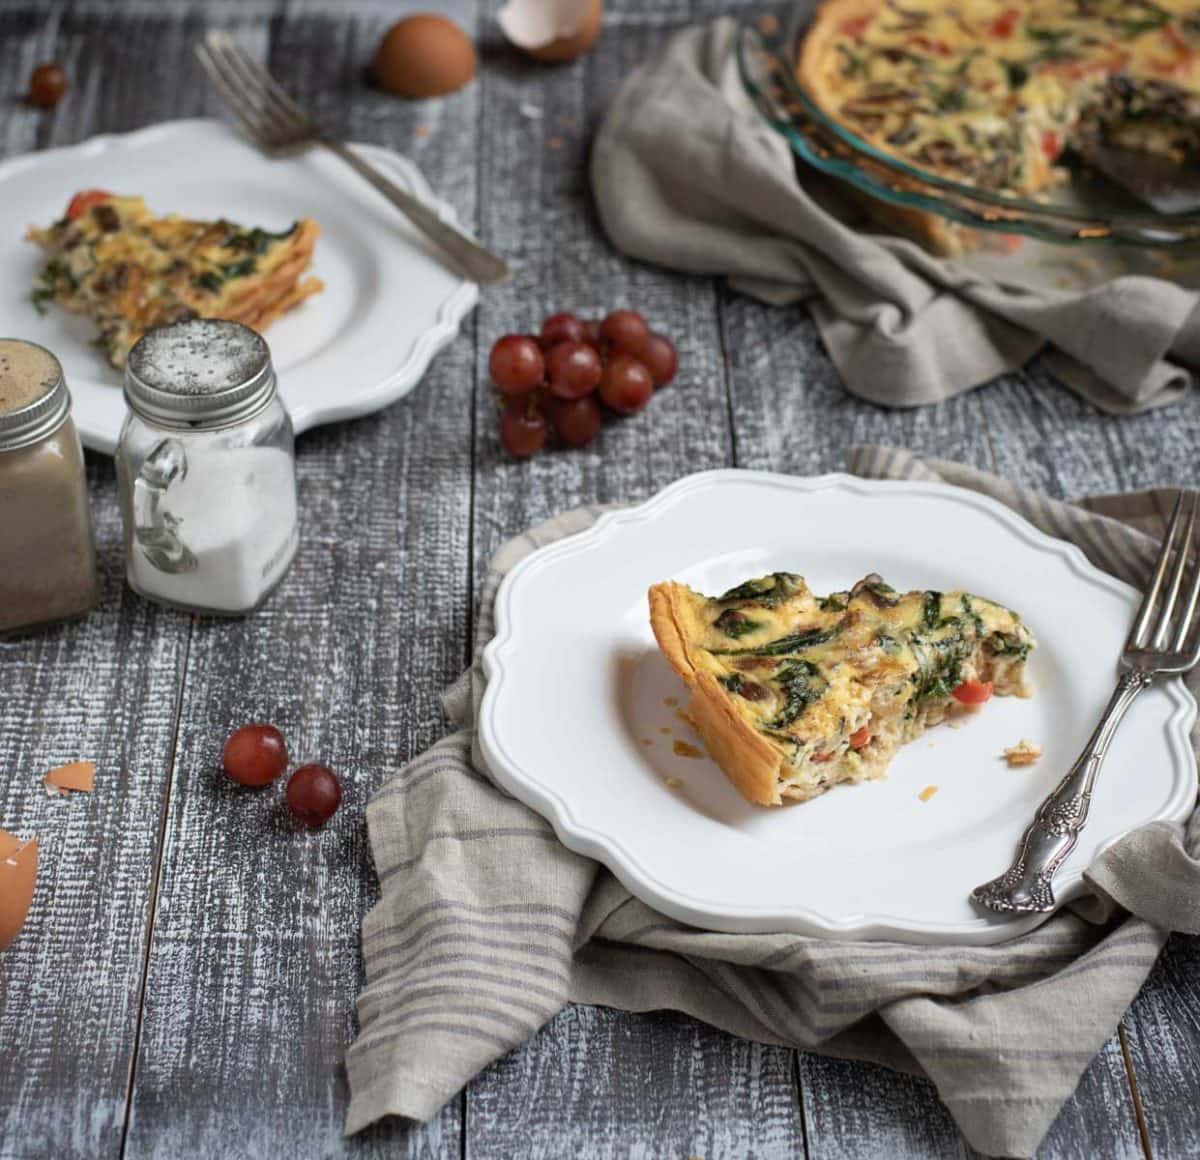 Plate with quiche slice and fork